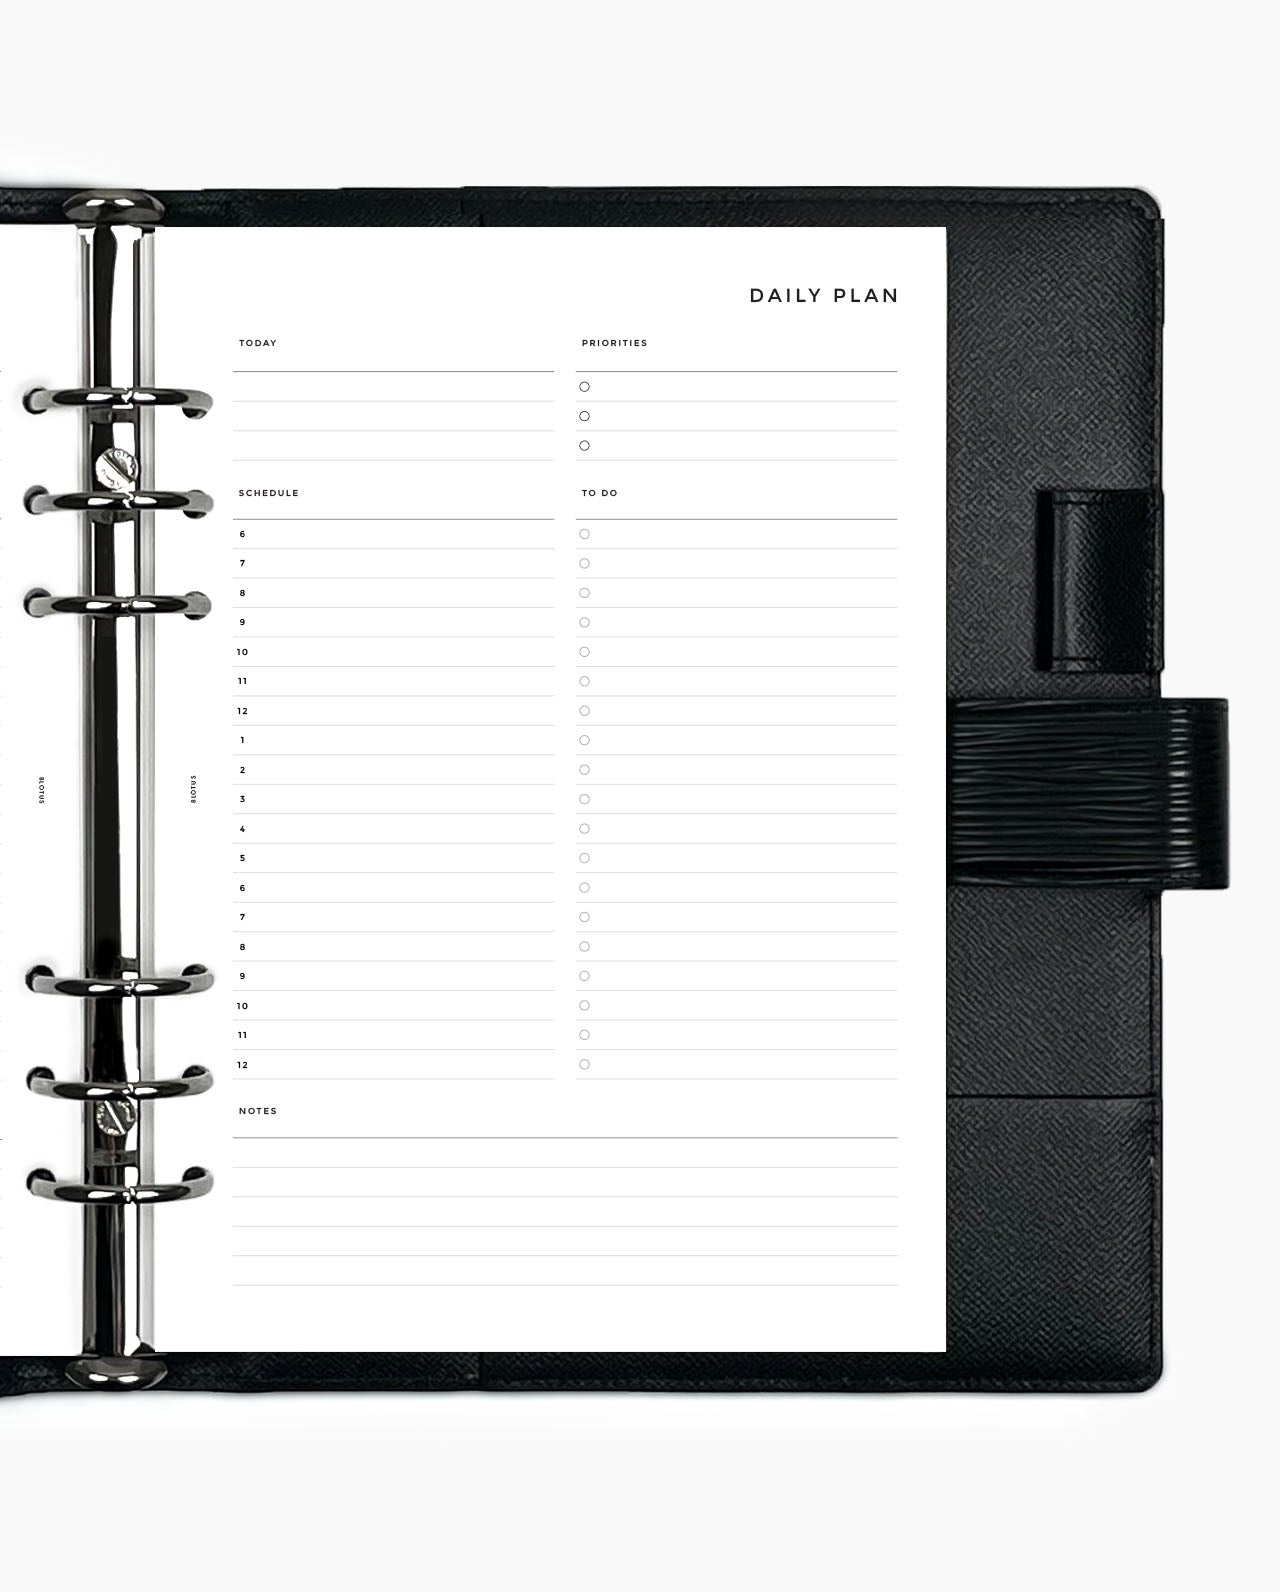 8Lotus Minimal Daily Hourly Planner Inserts displayed on a Louis Vuitton GM Agenda in Epi leather, featuring sections for date, weather, priorities, schedule, to-do list, and notes.